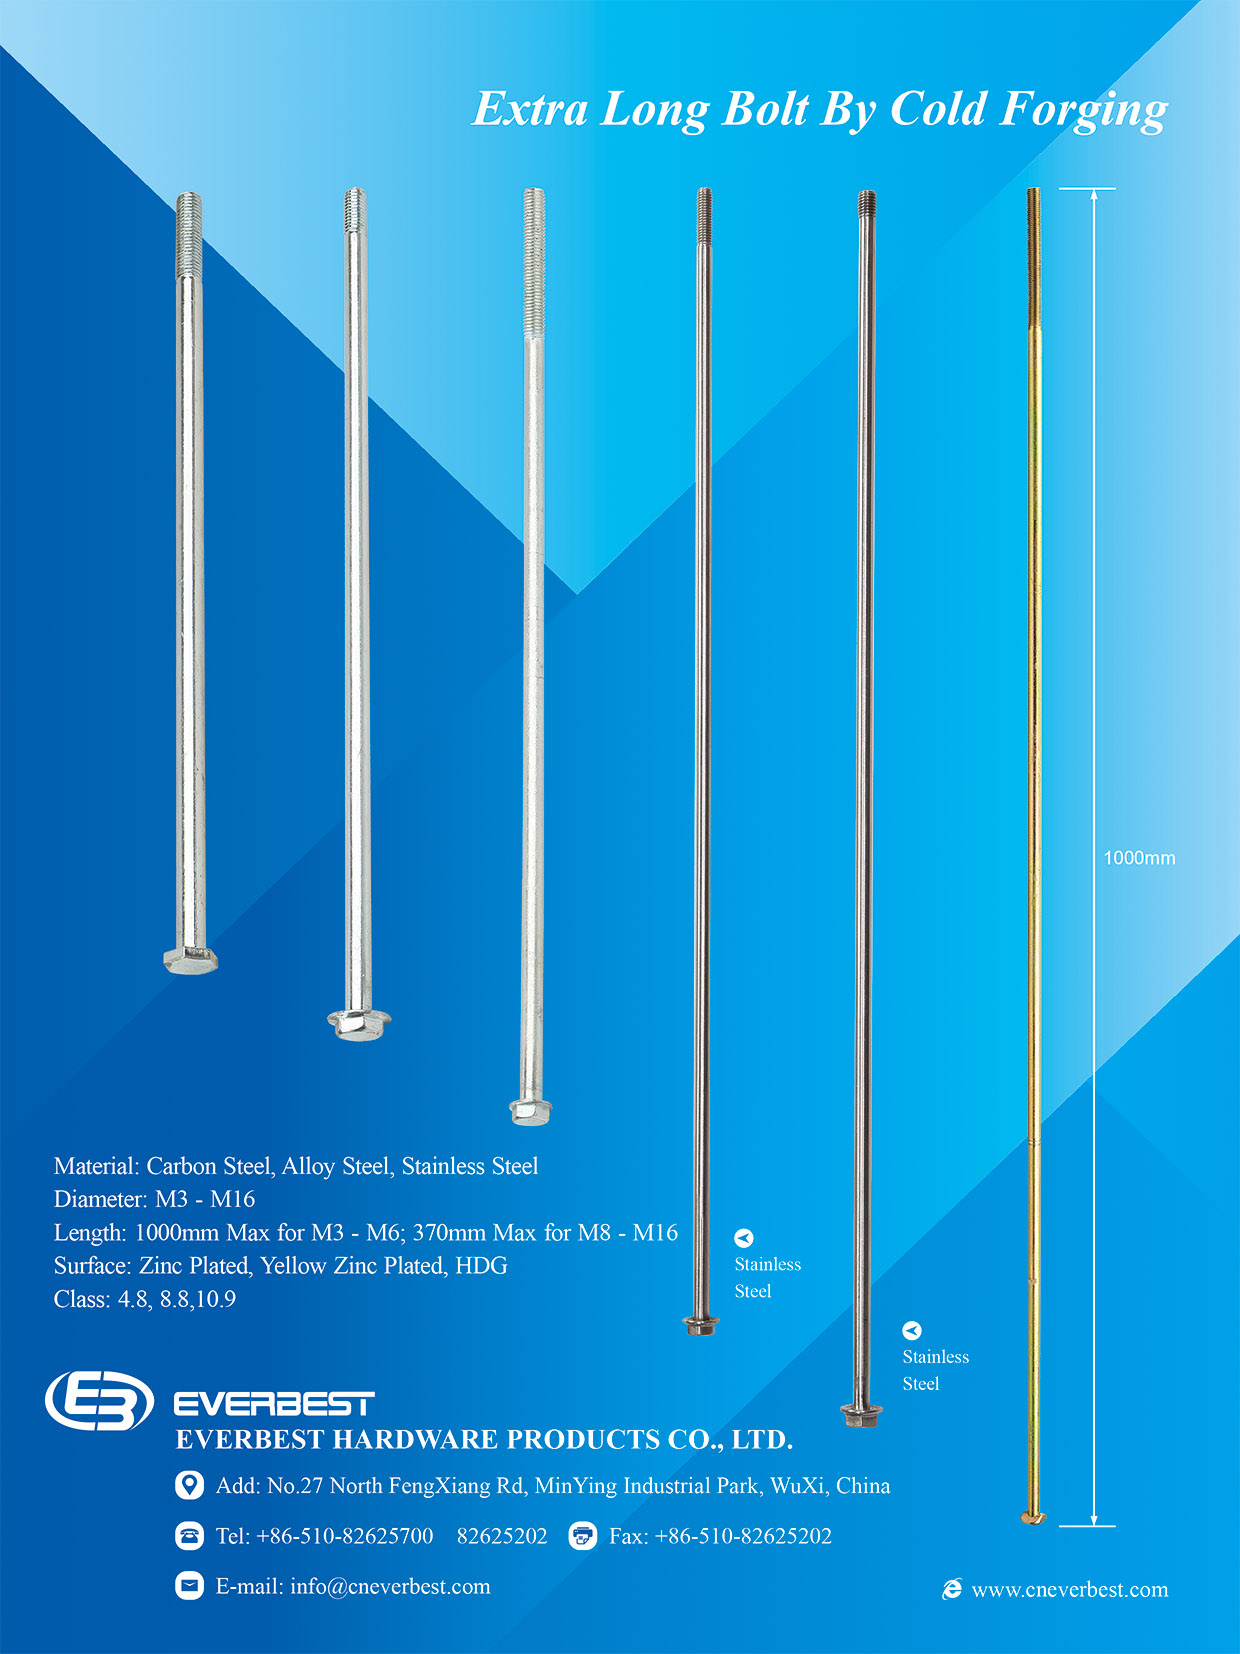 EVERBEST HARDWARE PRODUCTS CO., LTD.  , Extra Long Bolts by Cold Forging